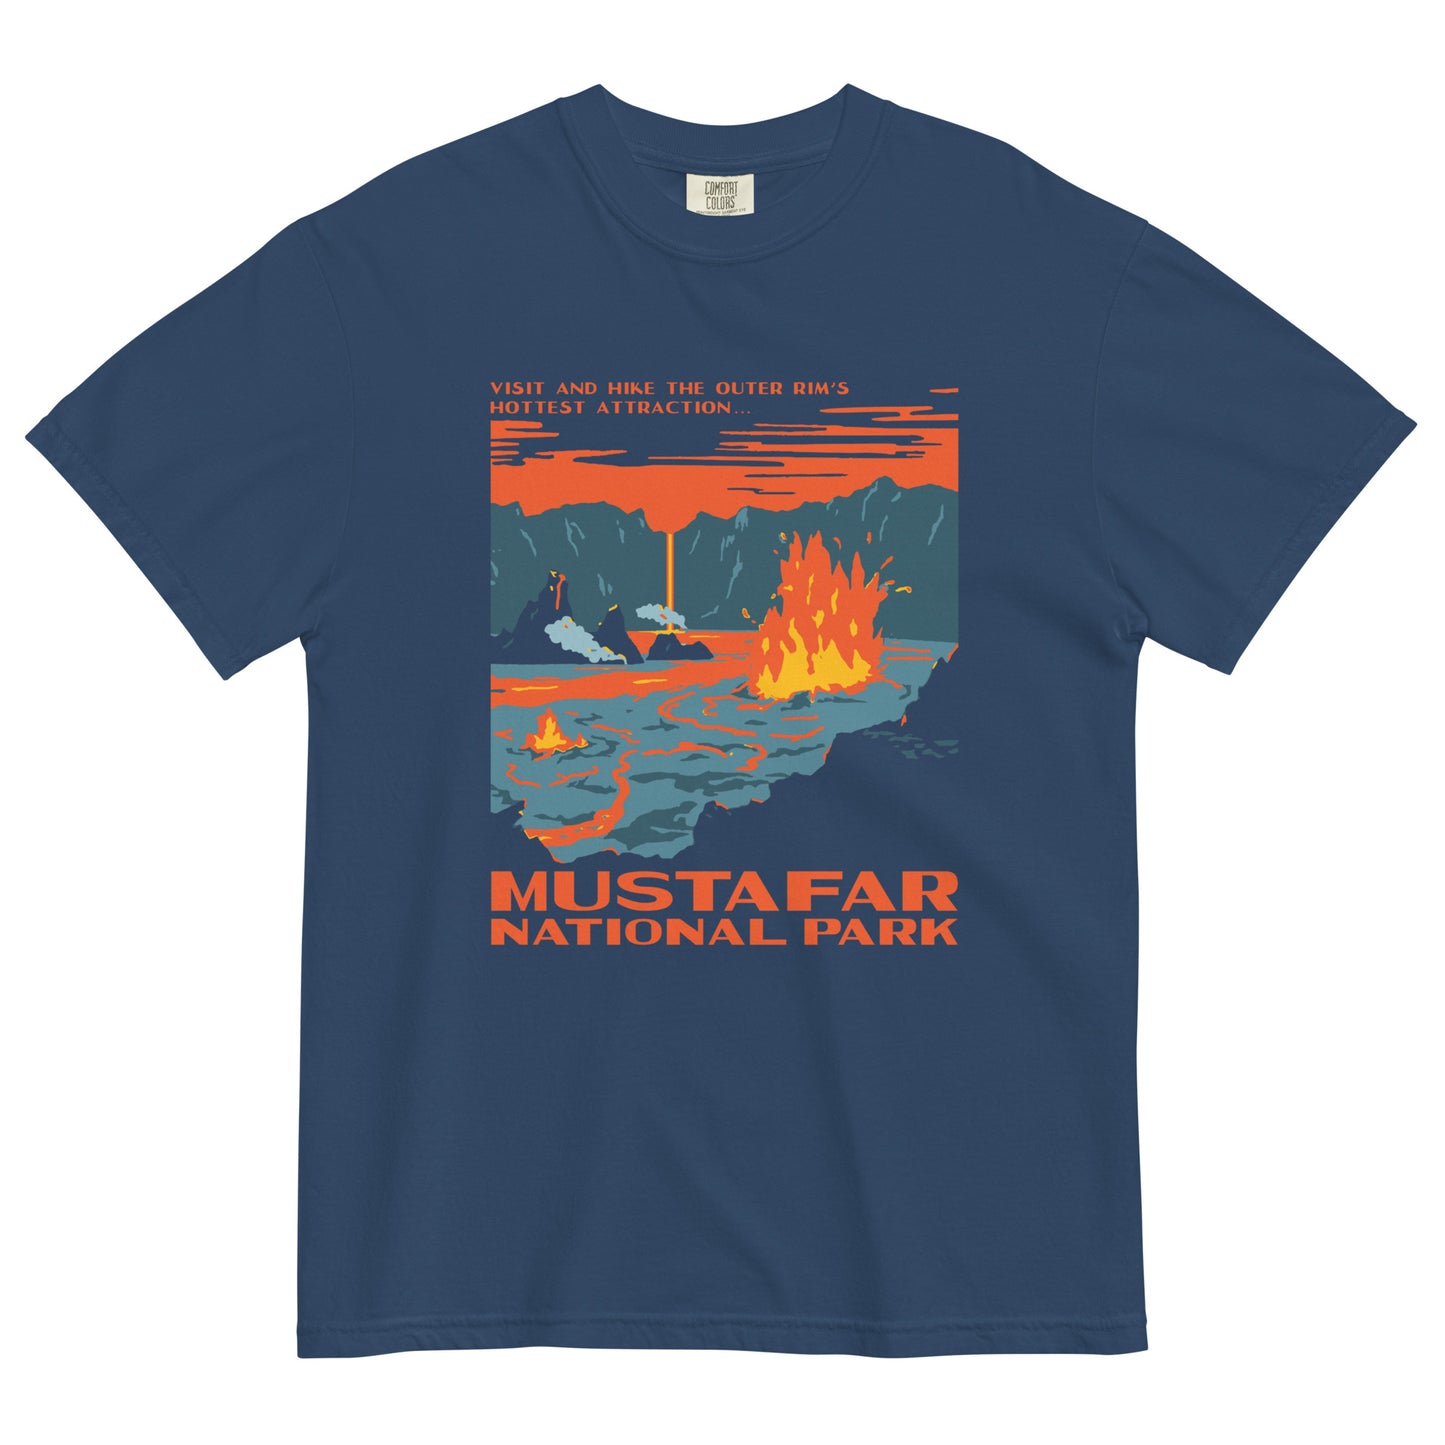 Mustafar National Park Men's Relaxed Fit Tee